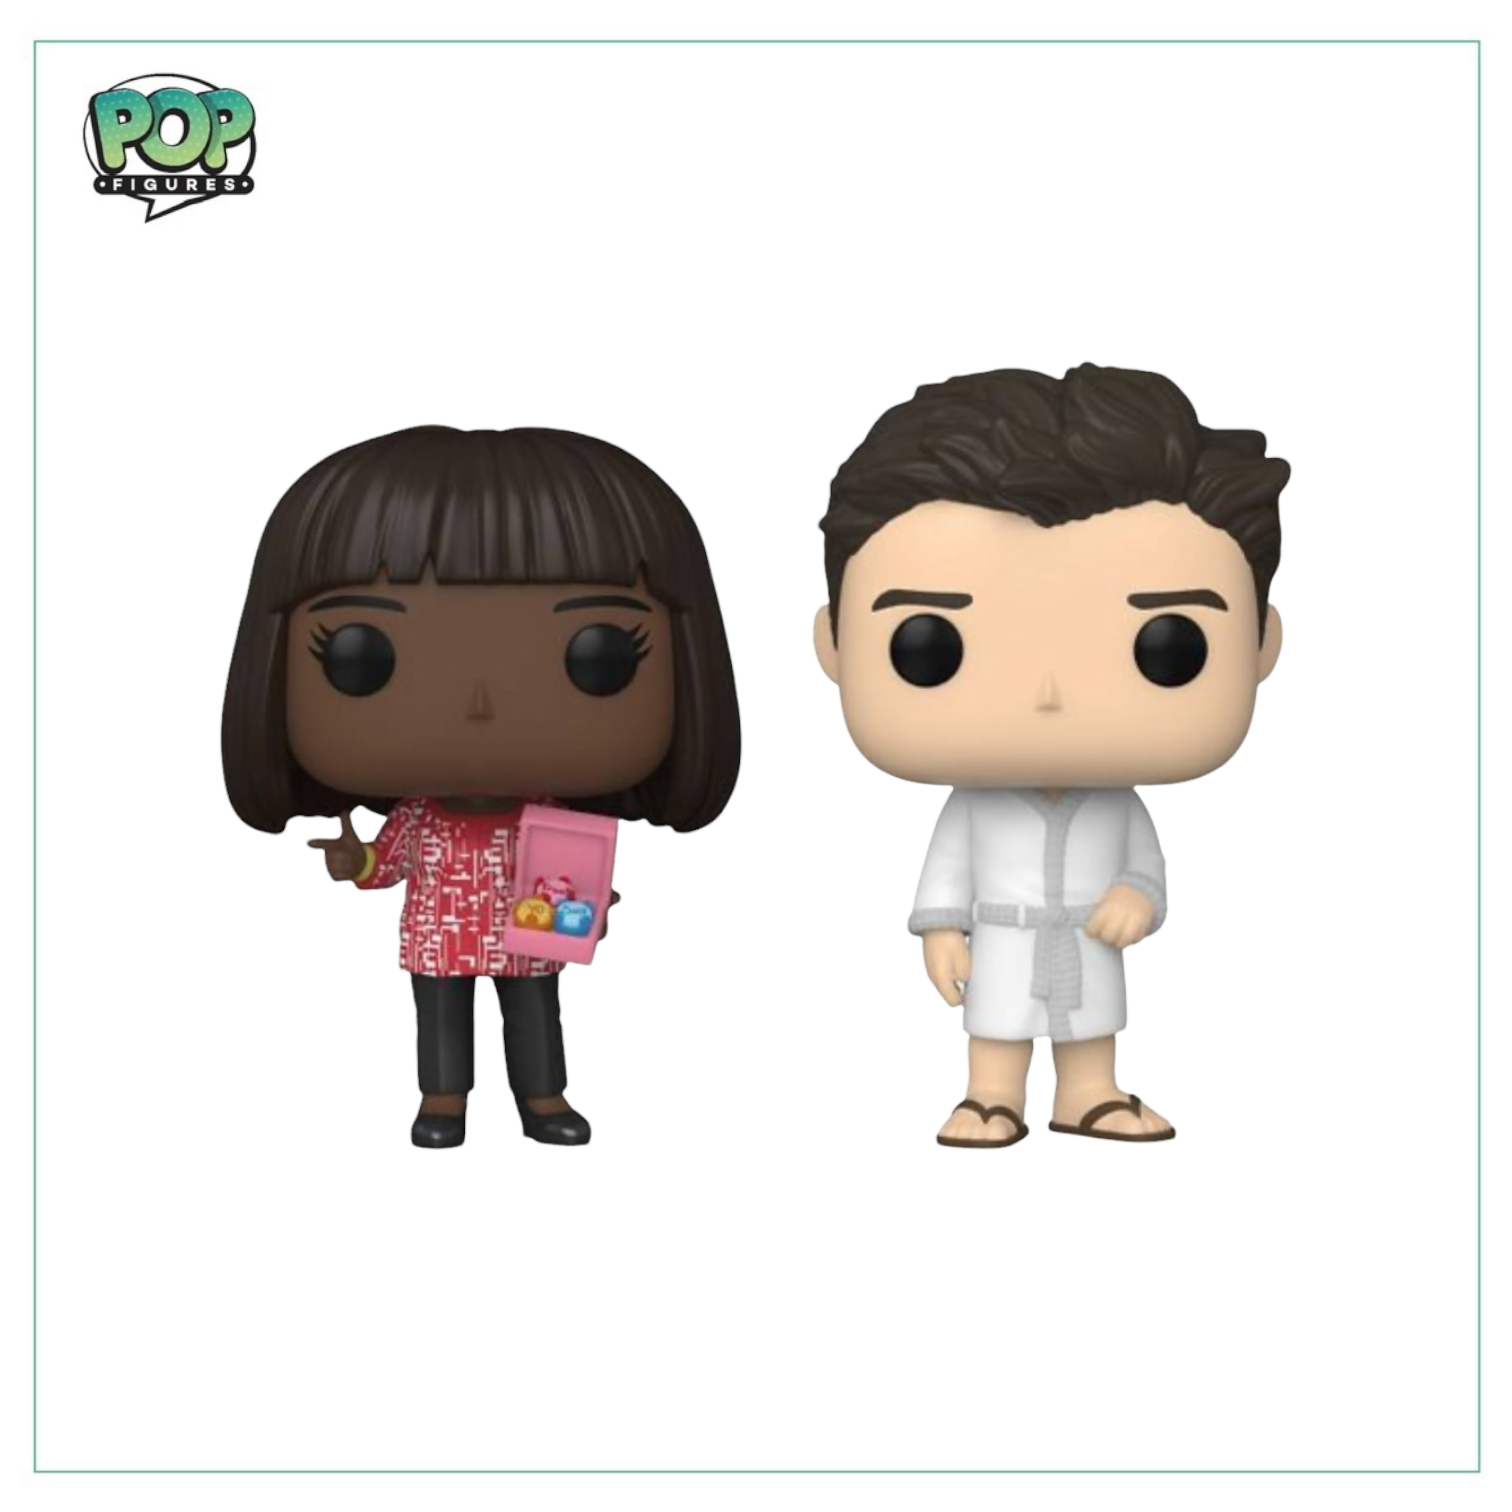 Donna & Ben Treat yo’ Self Deluxe Funko 2 Pack! Parks & Recreation - Target Con Exclusive